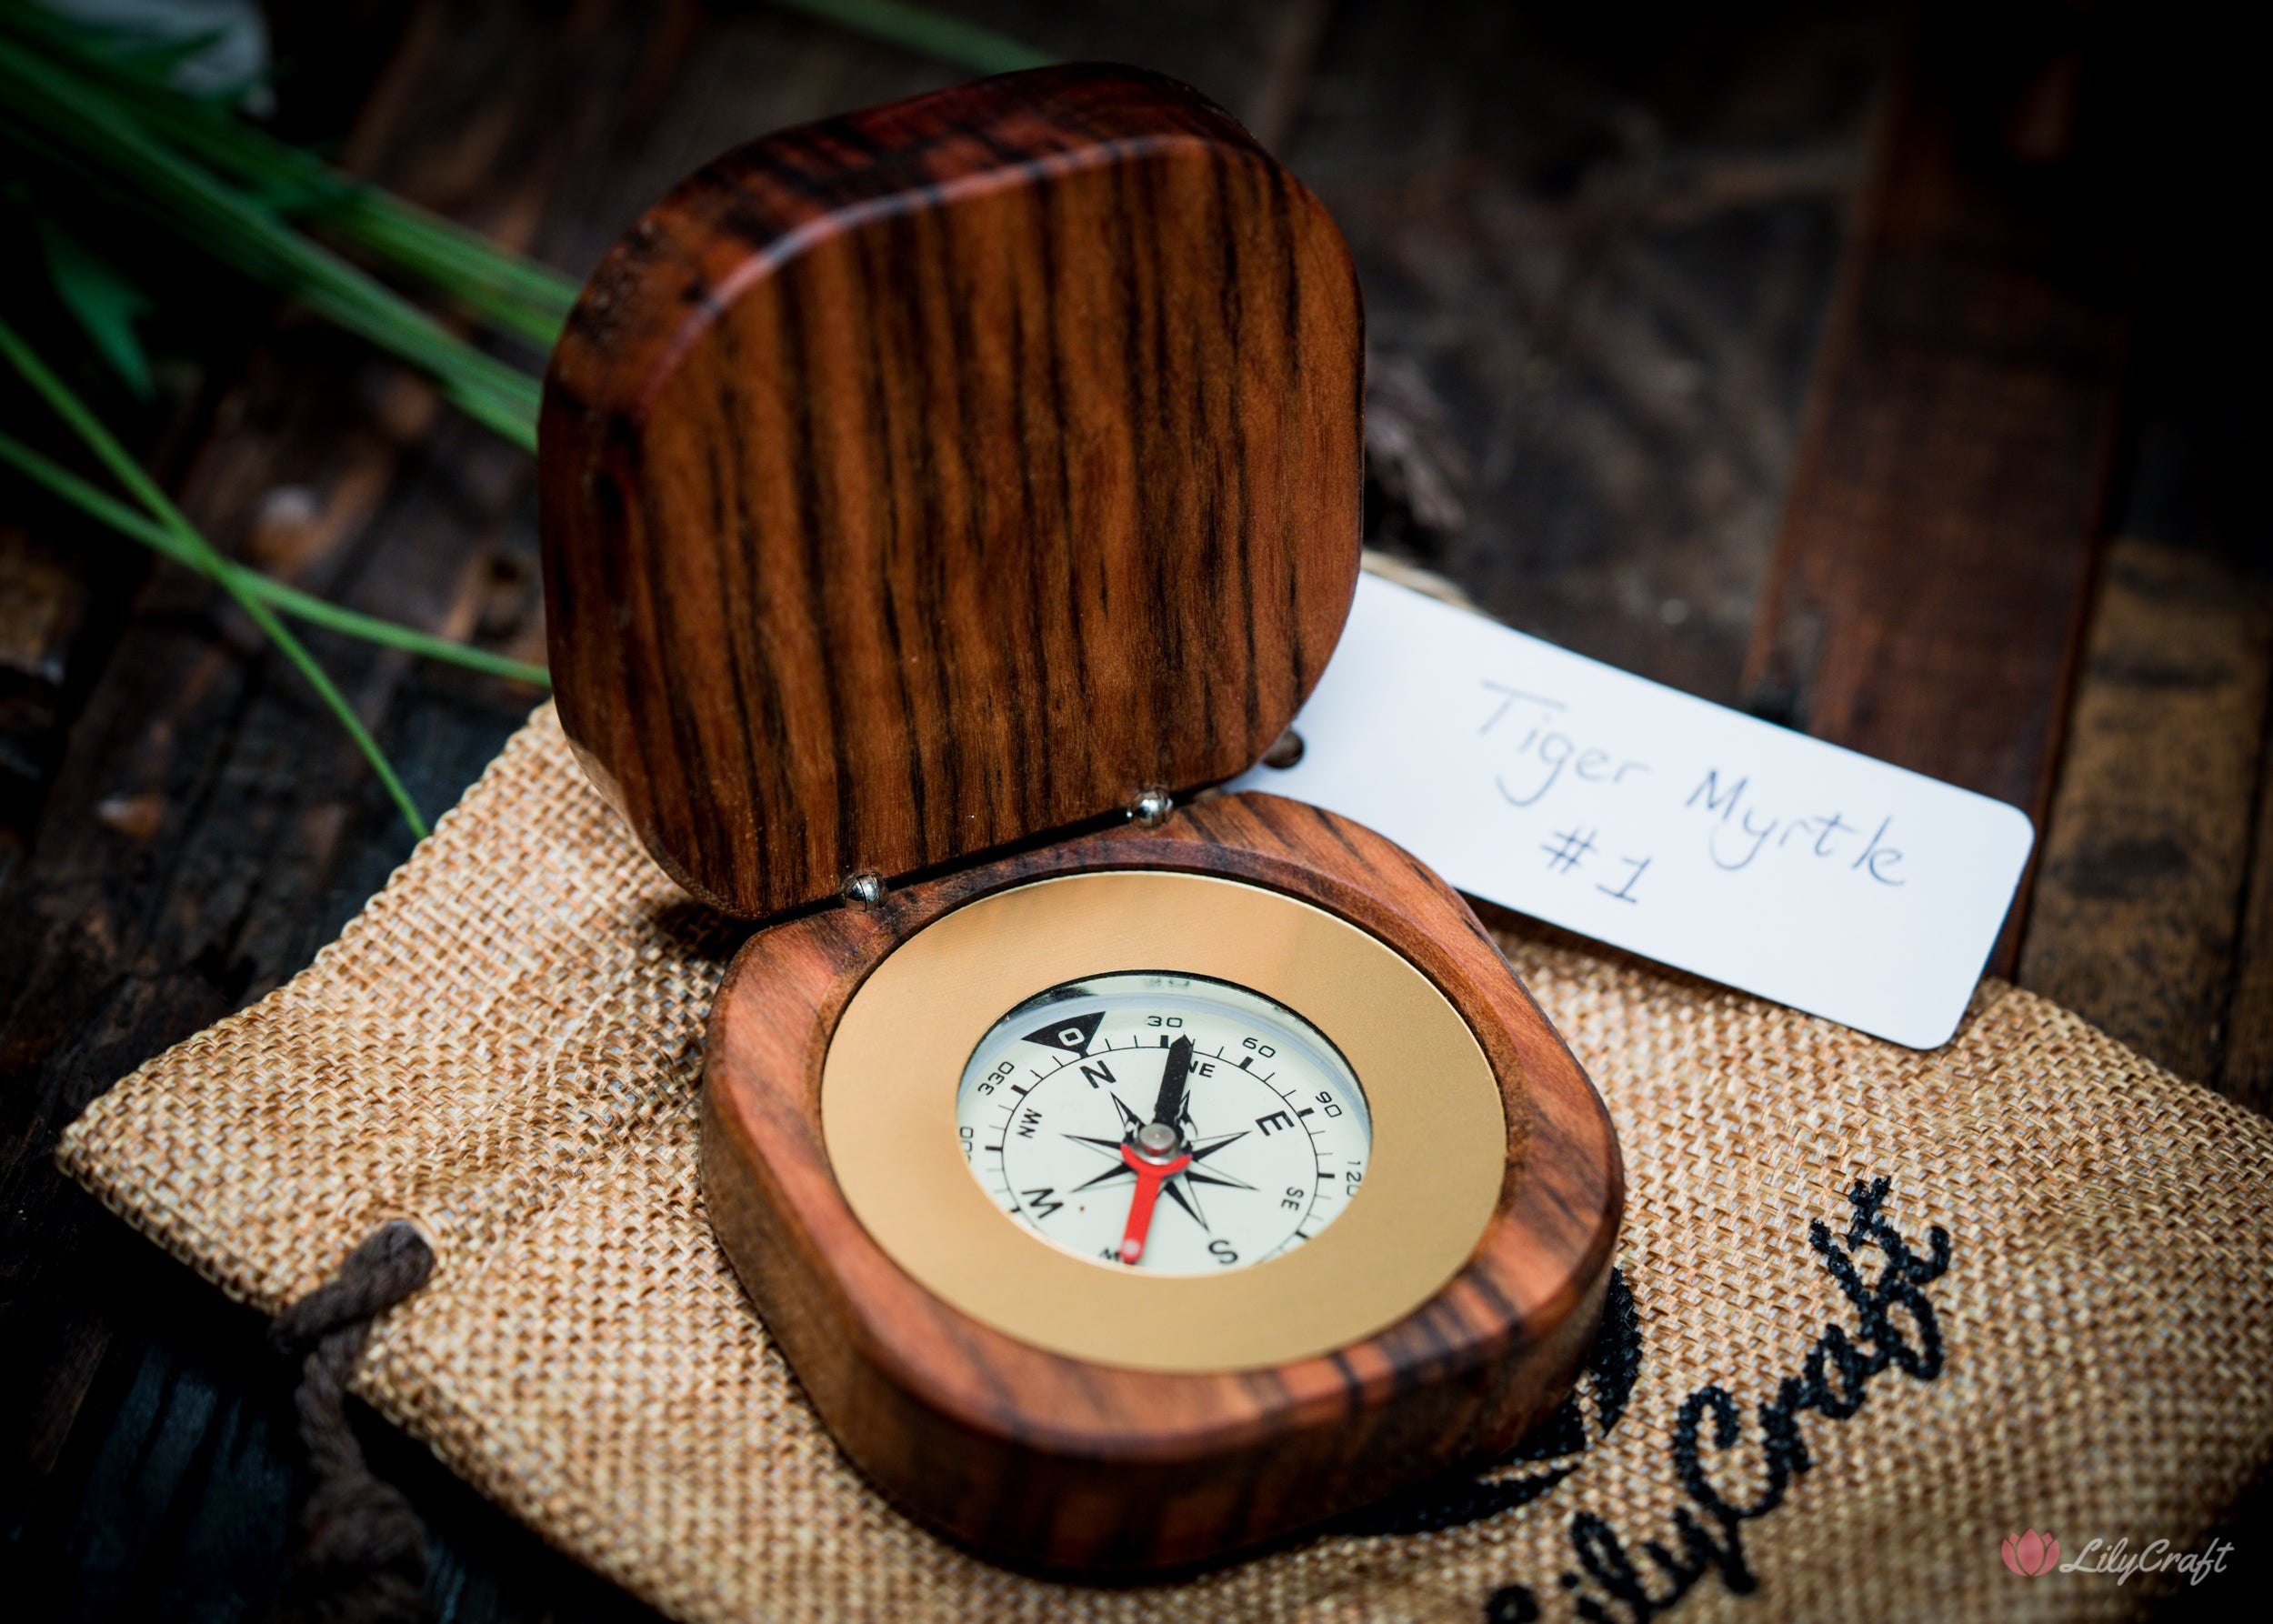 Compass resting on a wooden surface, ready for exploration.